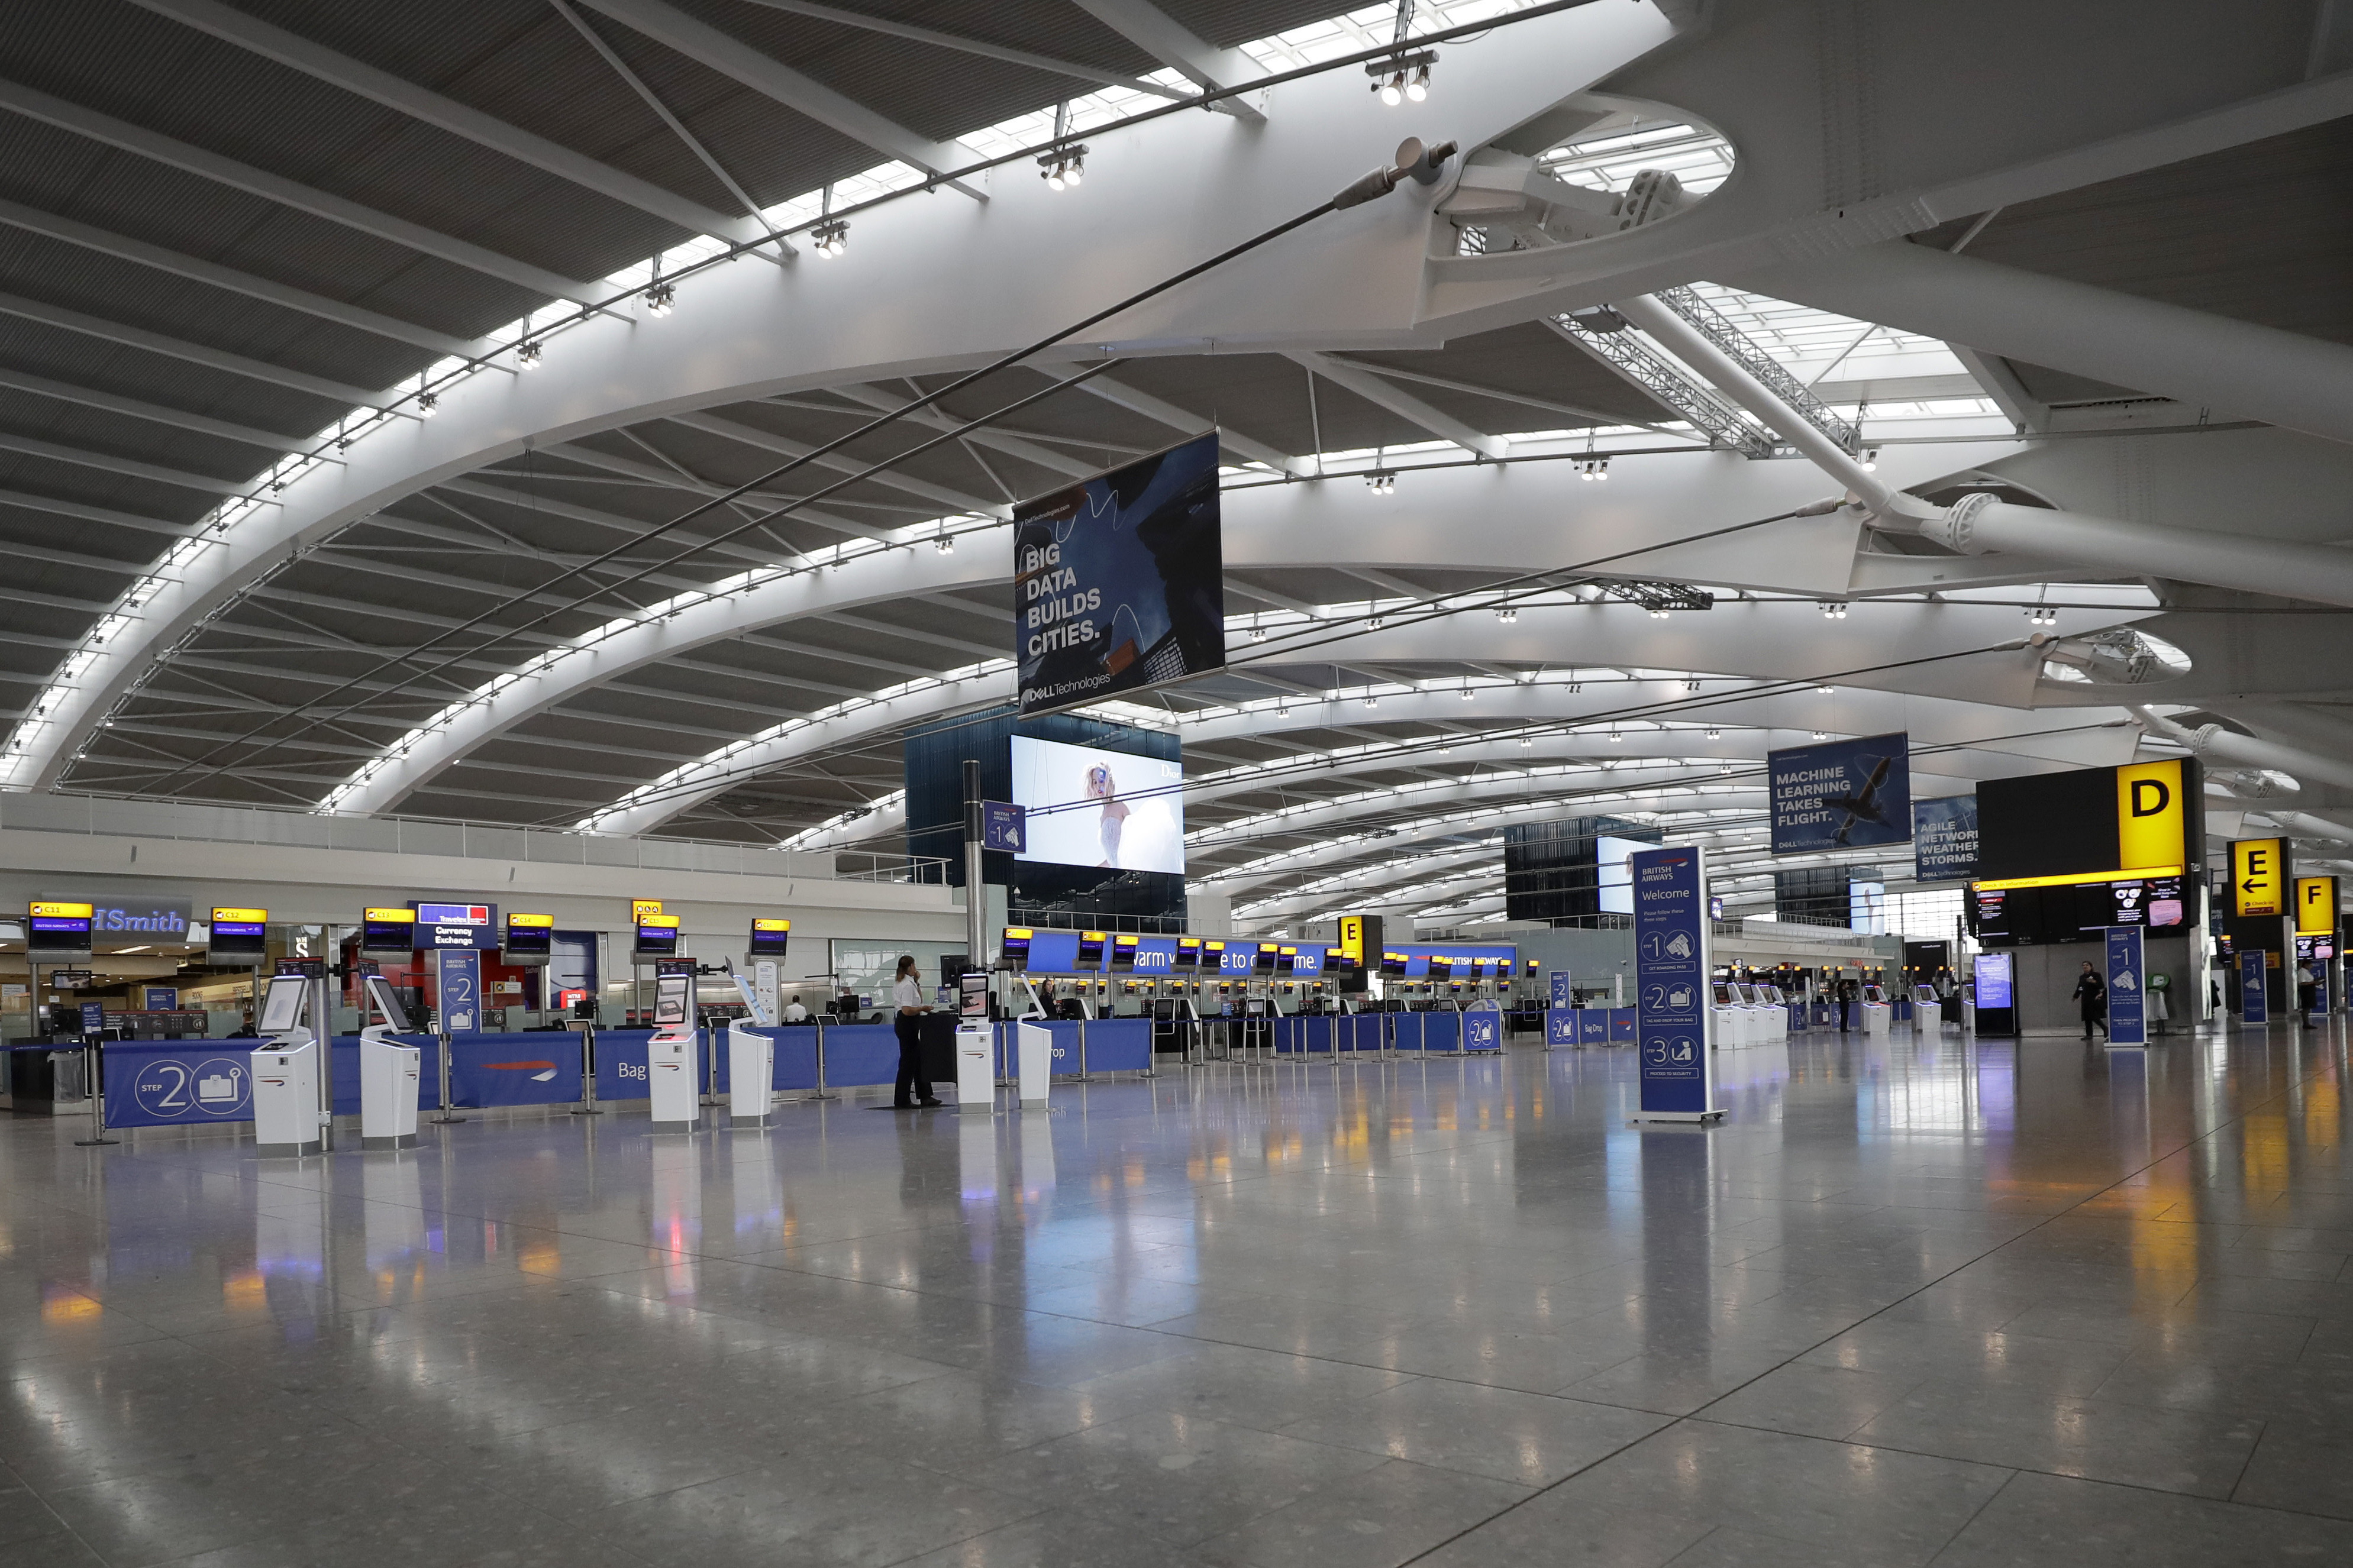 Strikes at Heathrow Airport in London, Europe’s busiest, would have wrought havoc for the millions of people going through during the peak summer travel period. Photo: AP